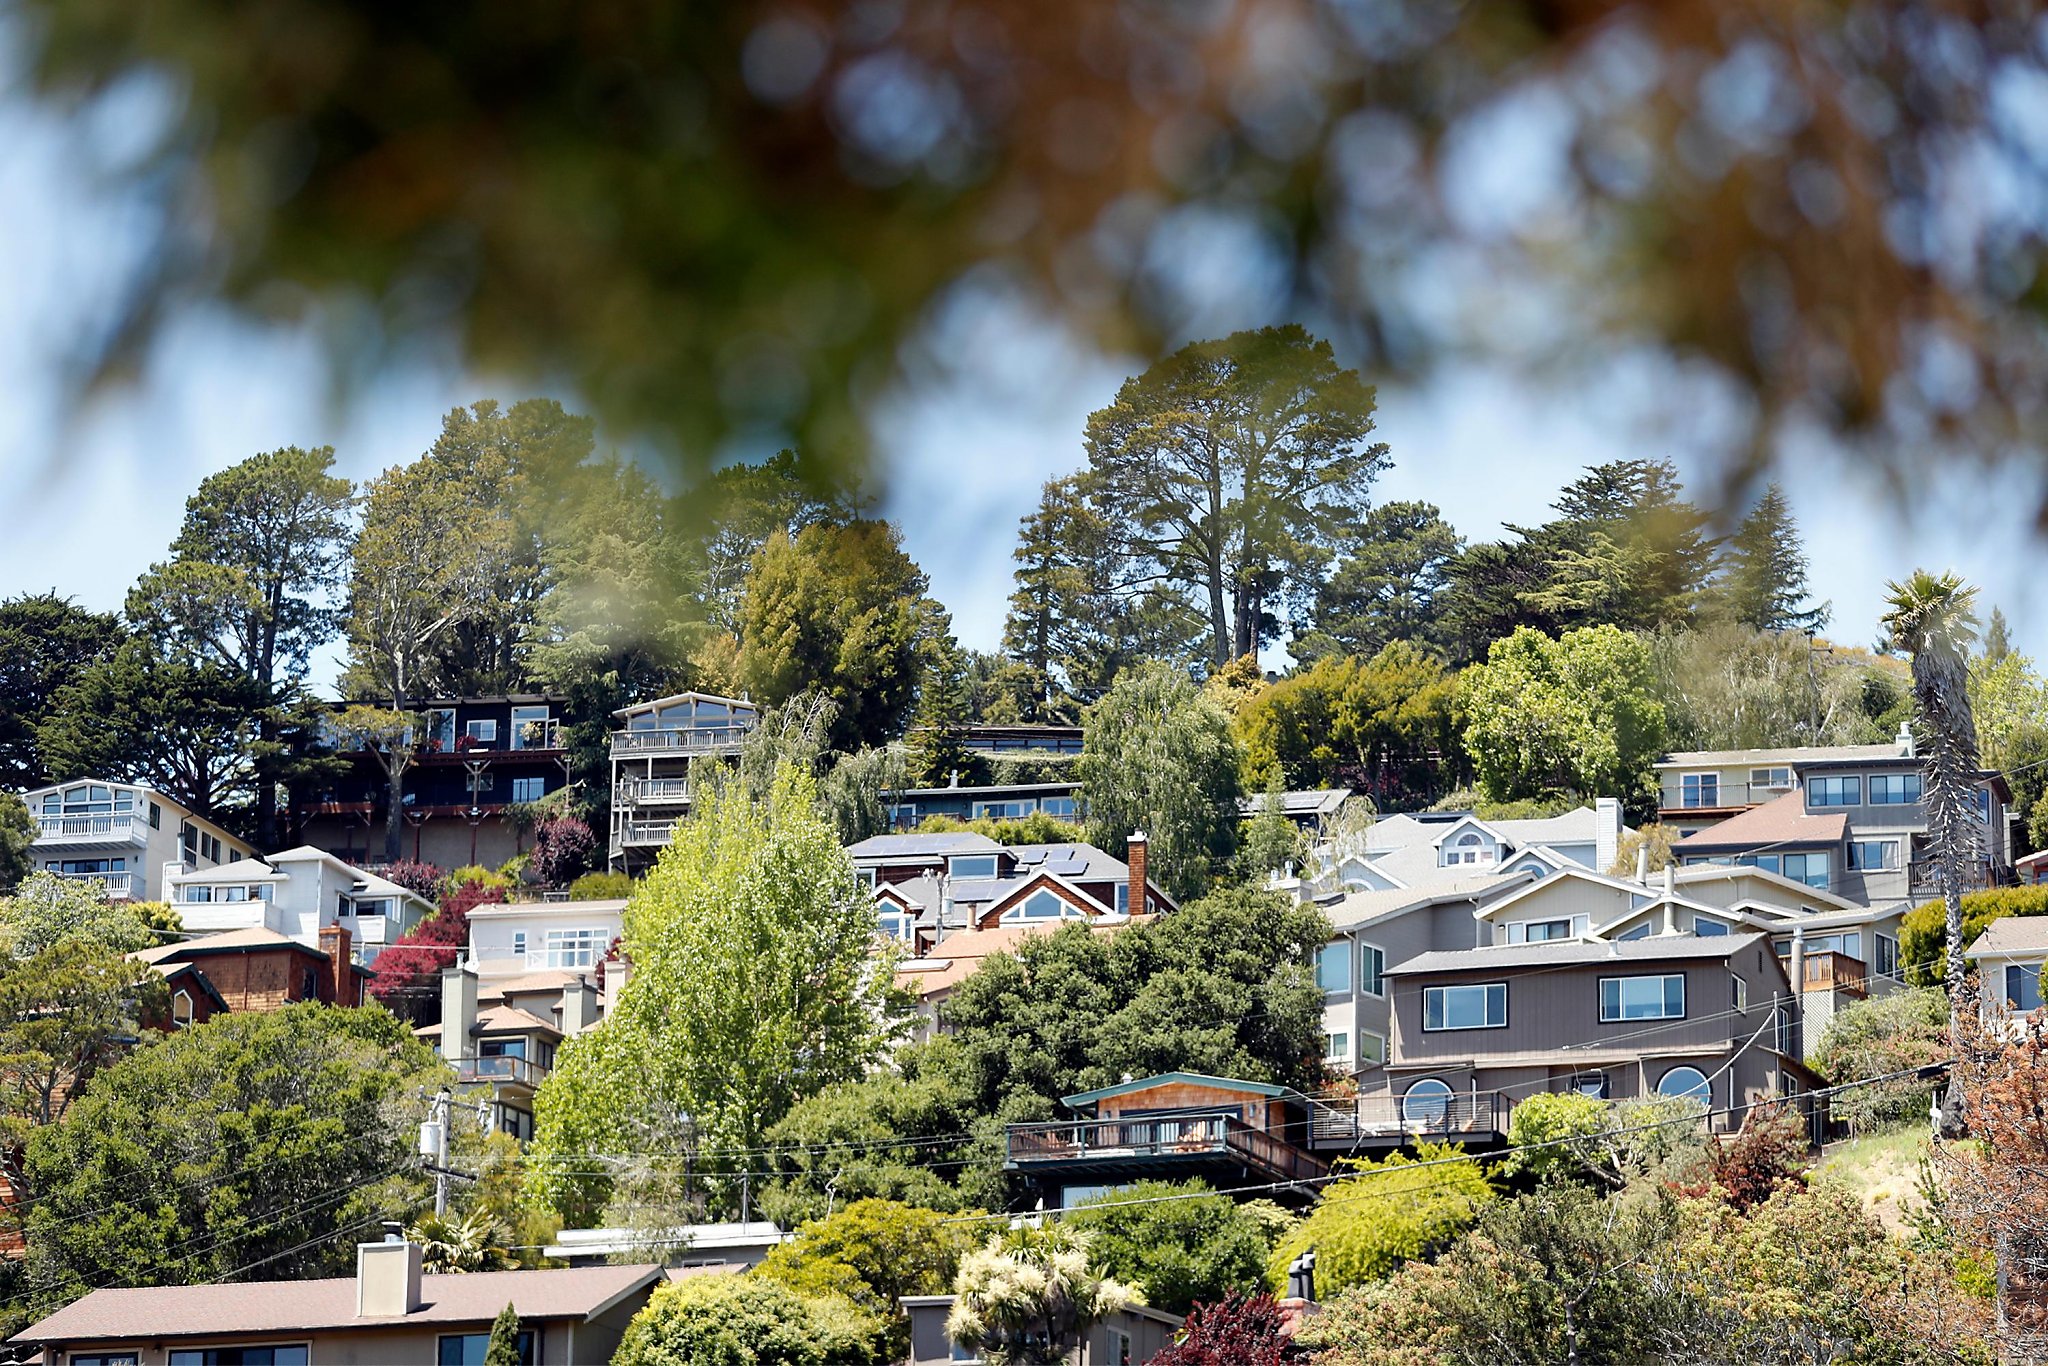 In the latest sign that the pandemic has done nothing to mitigate California’s housing crisis, the median price for a single-family home in the 